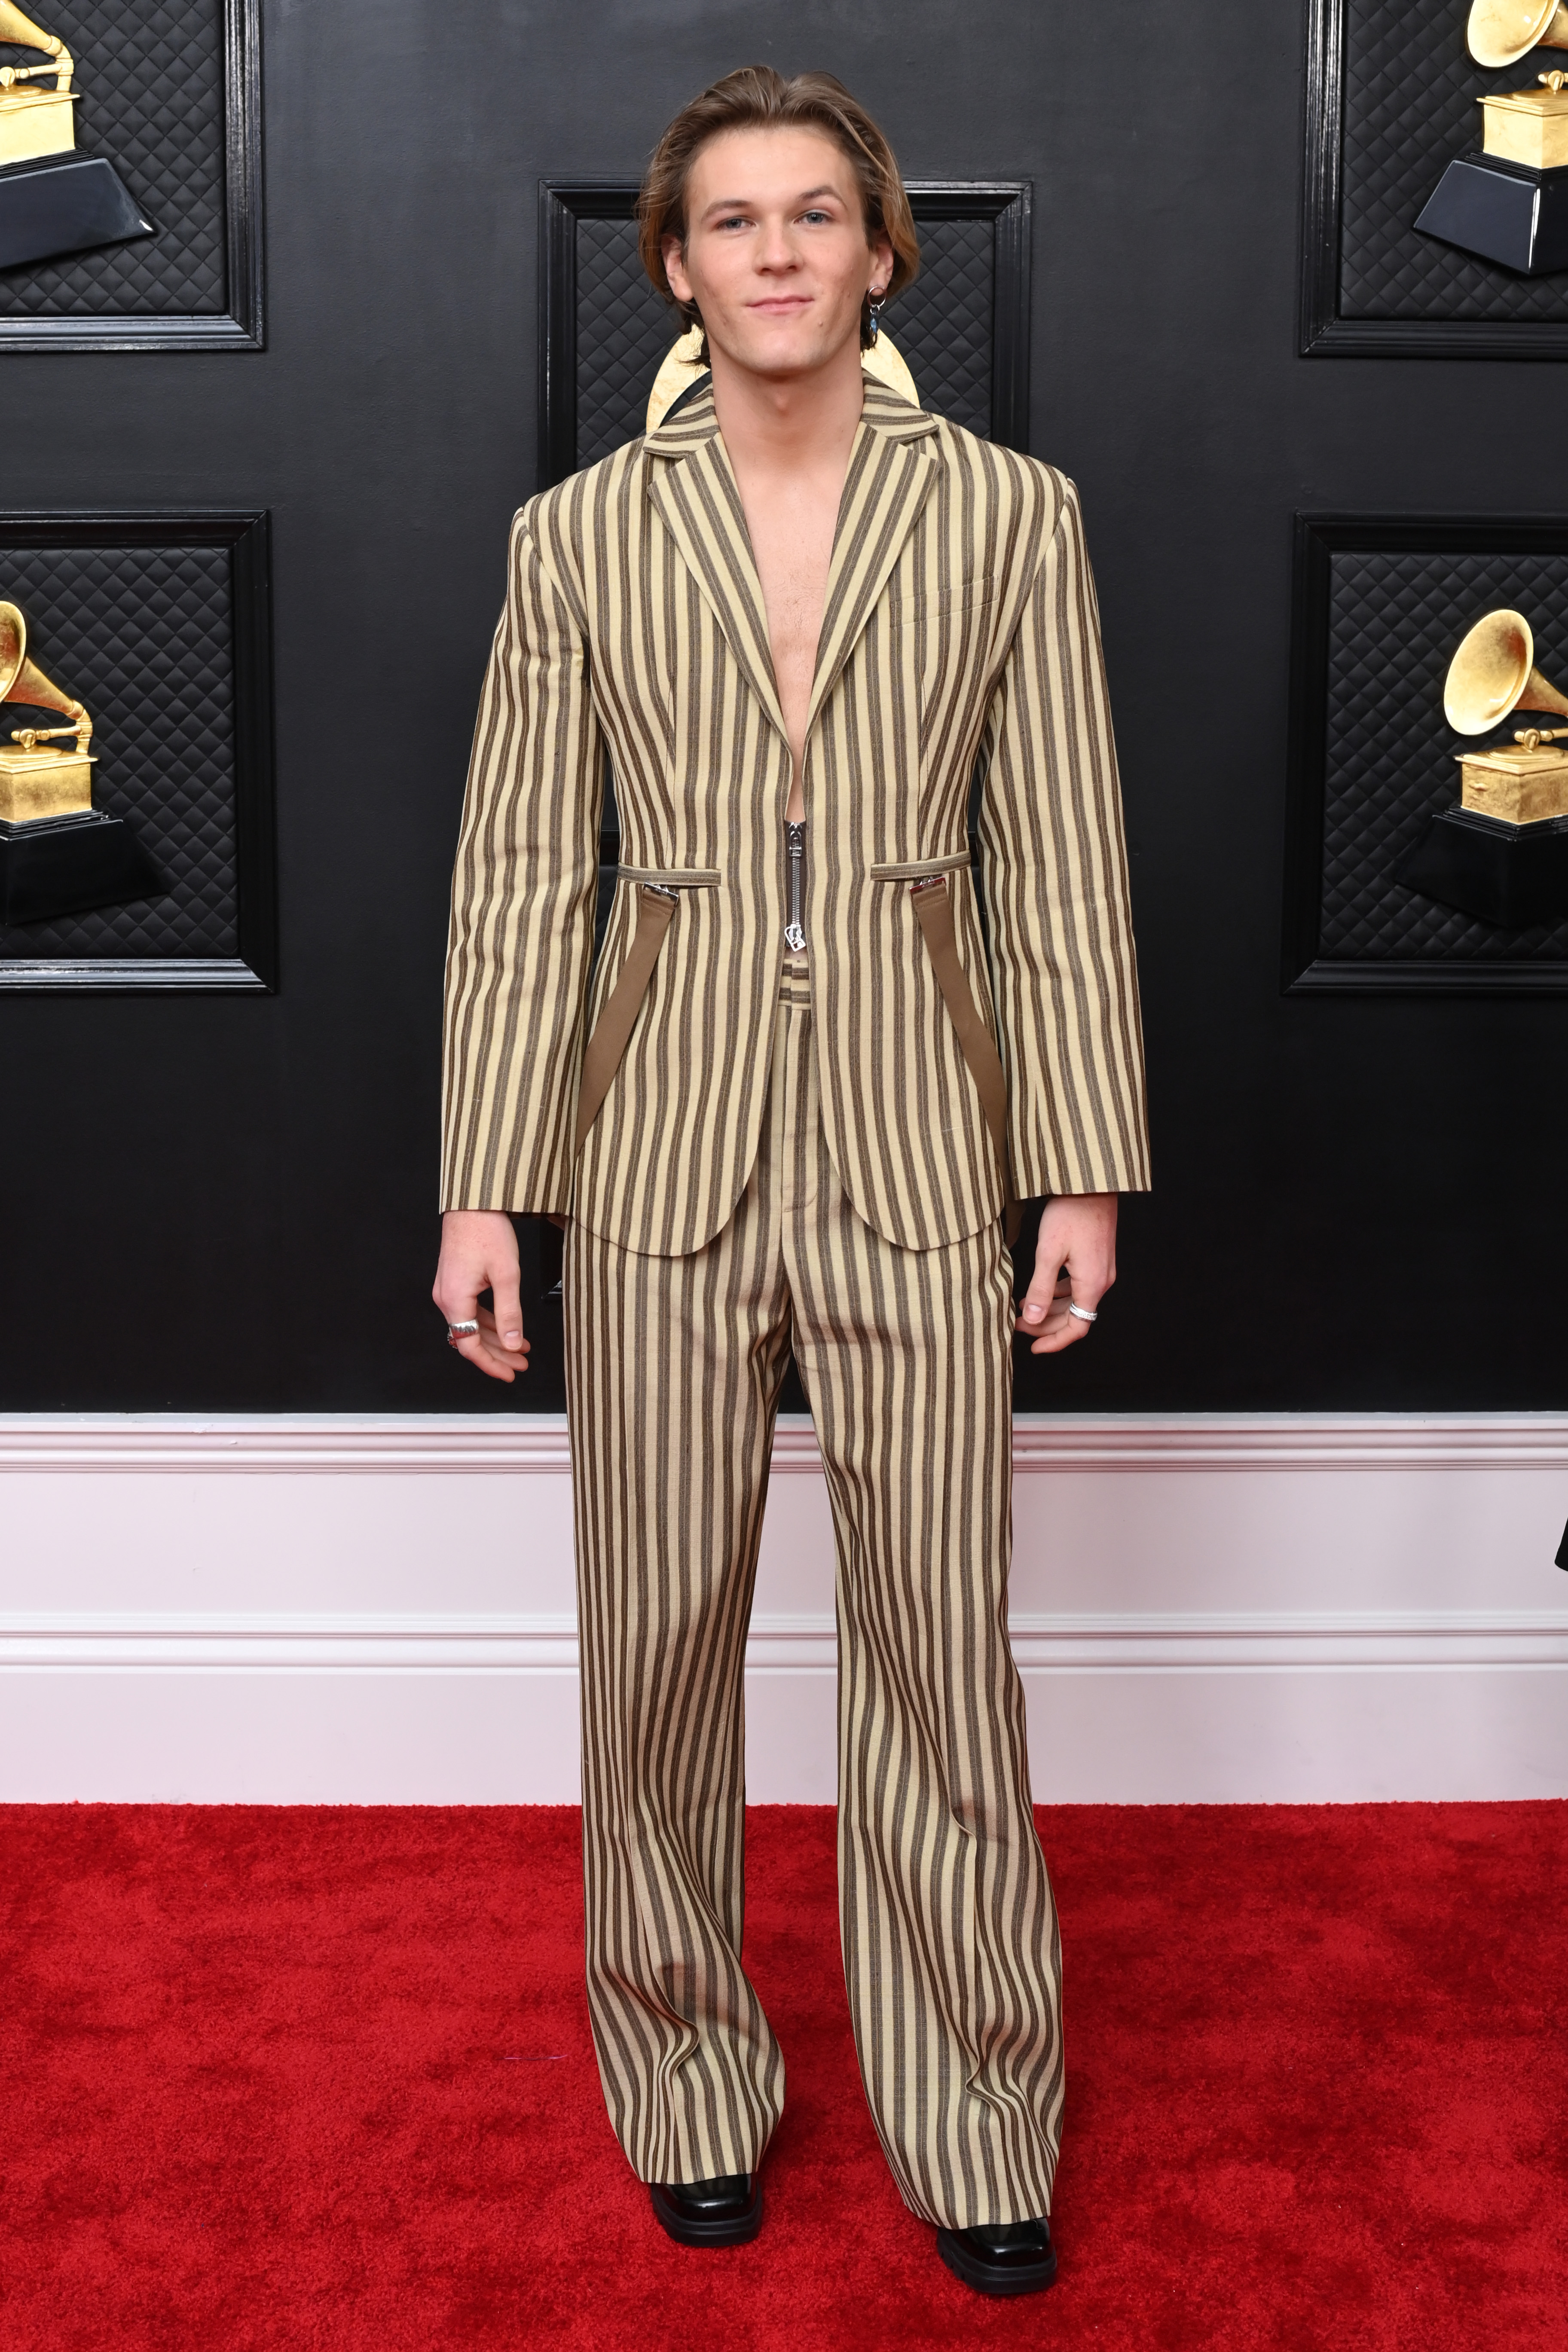 Grammys 2023 Red Carpet Photos: Young Hollywood Stars